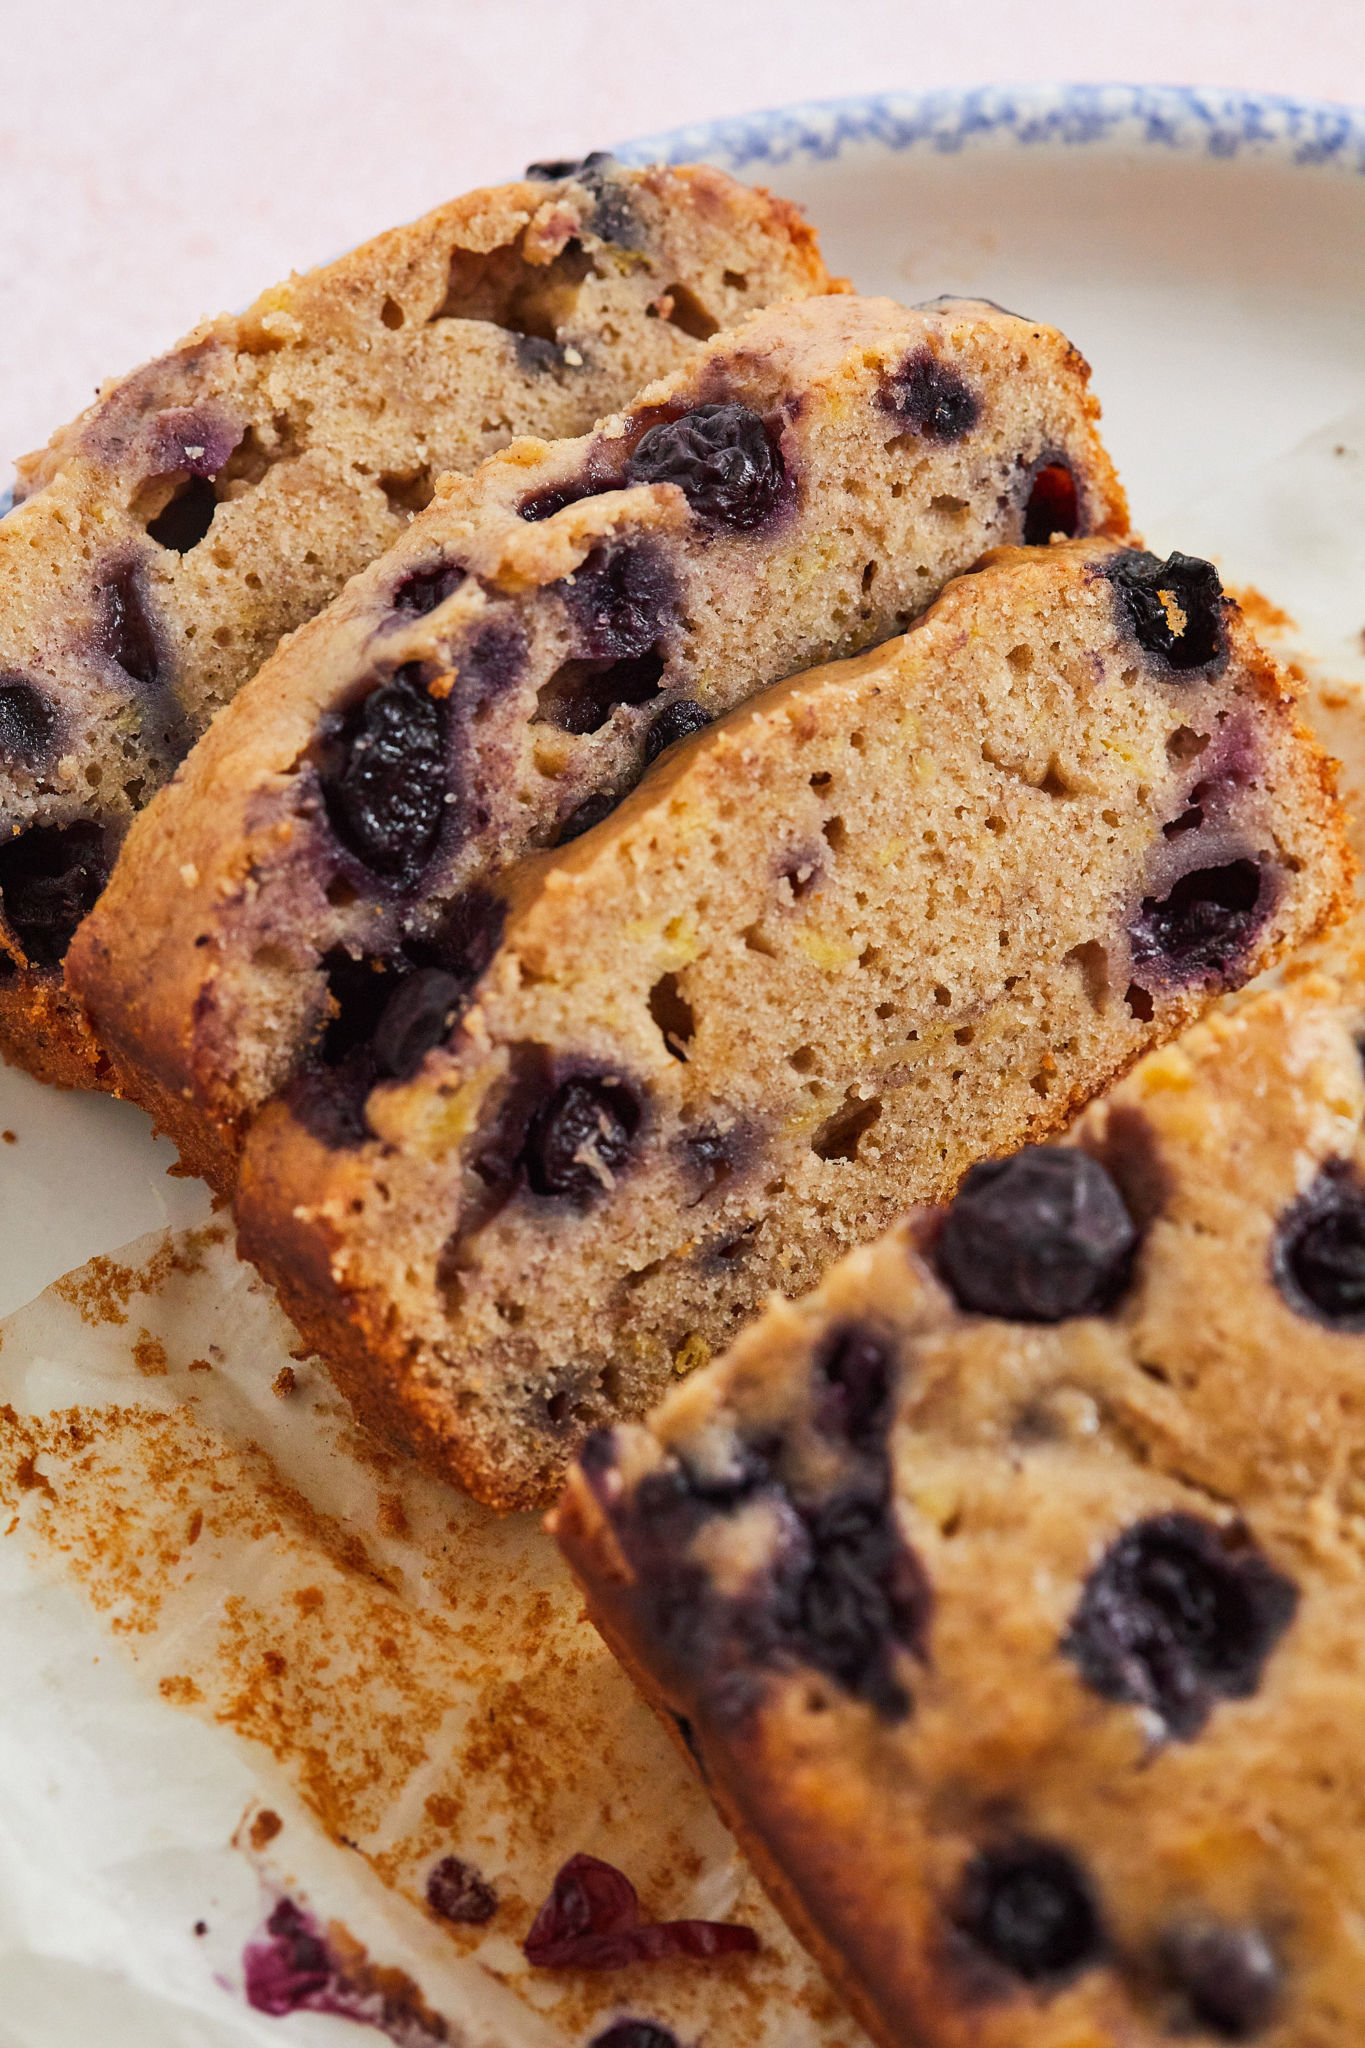 A close-up of the slices of my blueberry banana bread recipe.